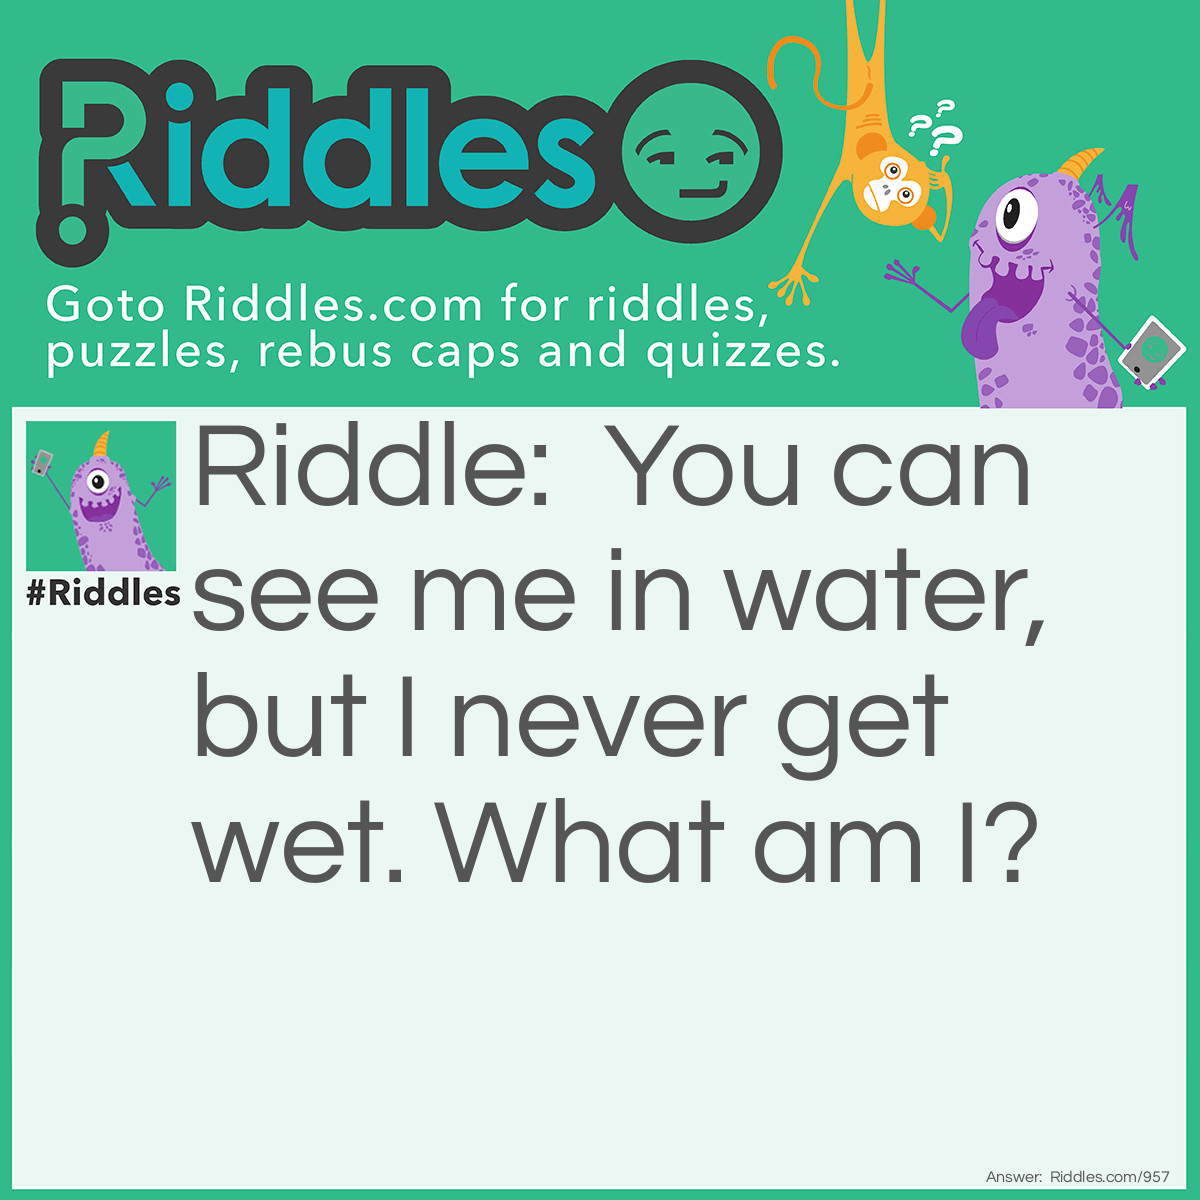 Riddle: You can see me in water, but I never get wet. 
What am I? Answer: A reflection.